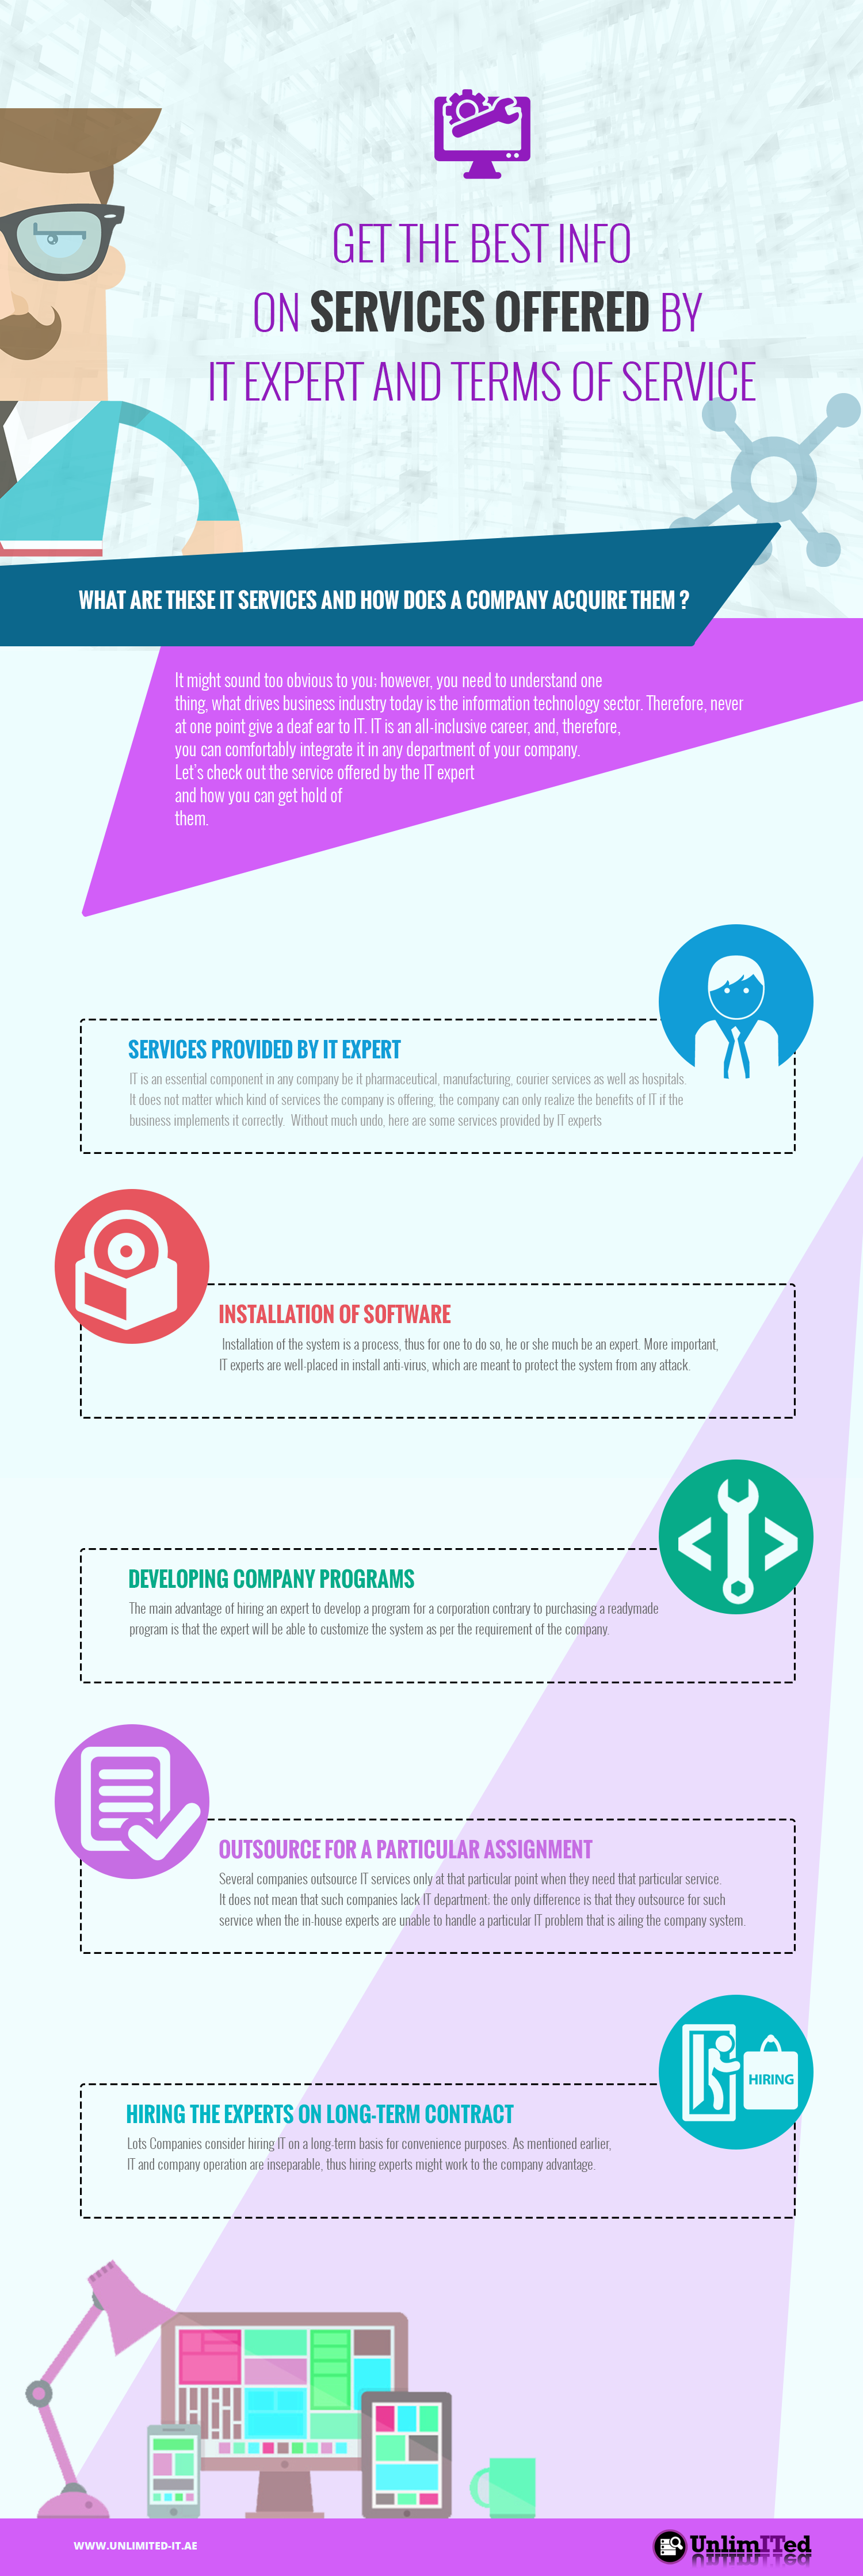 Get the best Info on Services offered by IT expert and terms of Service Infographic